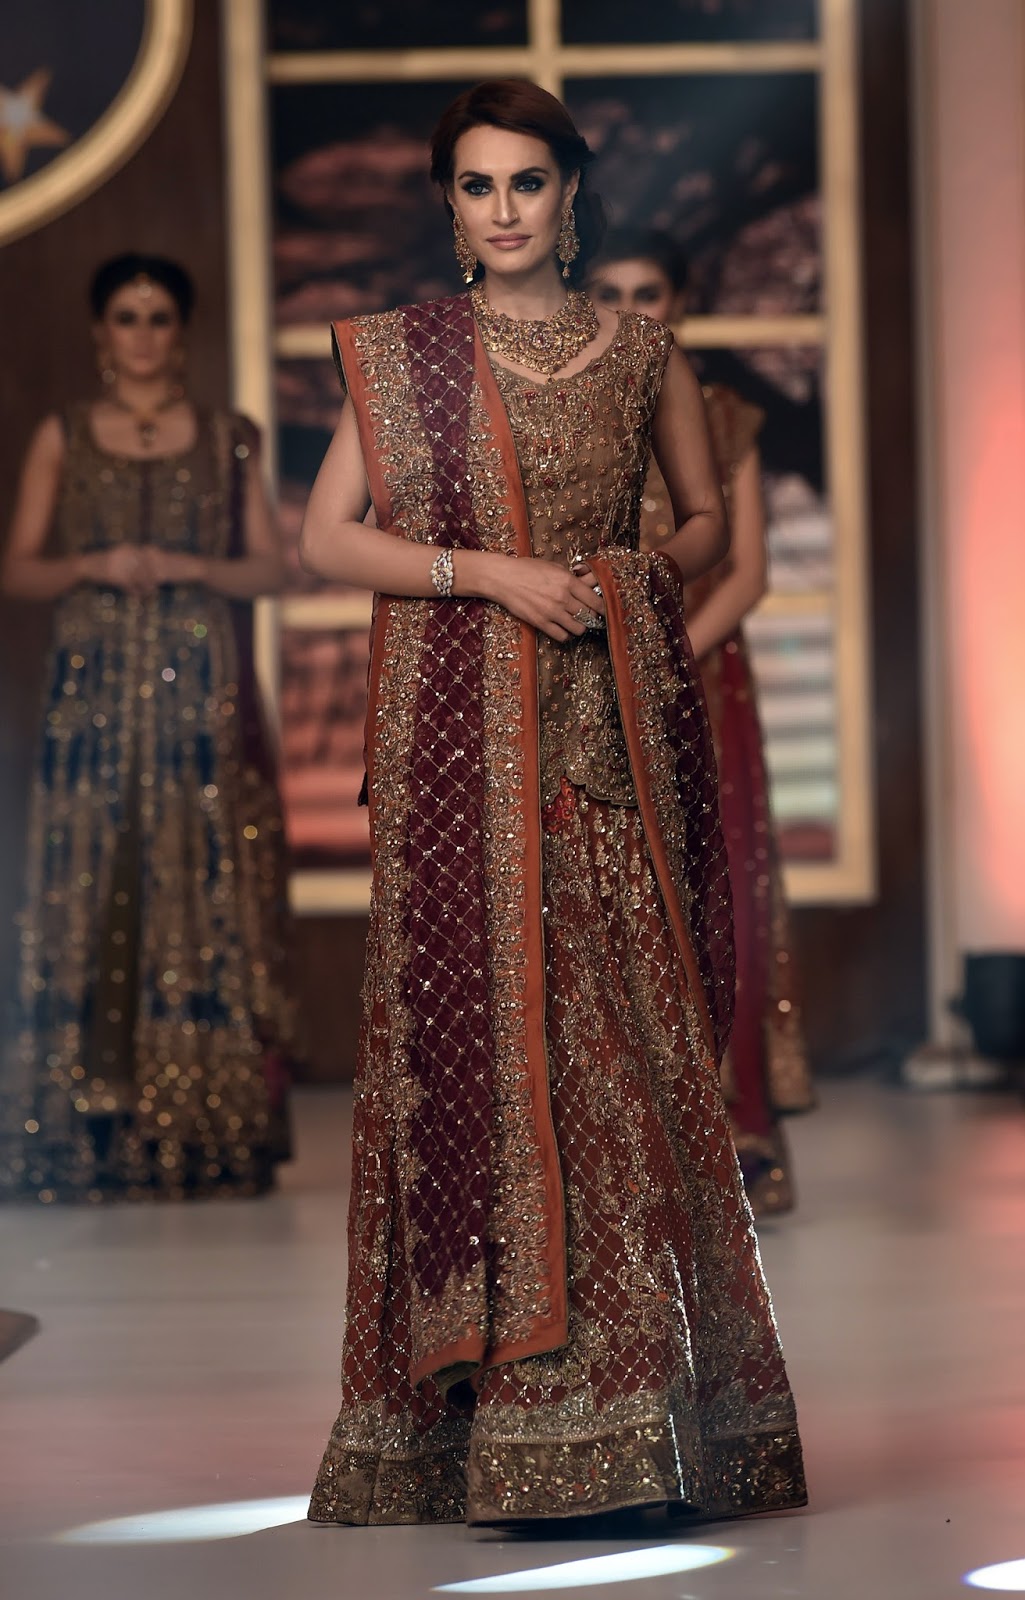 HD Photos: Pakistan Fashion Bridal Couture Week 2015 Lahore in HD Pictures